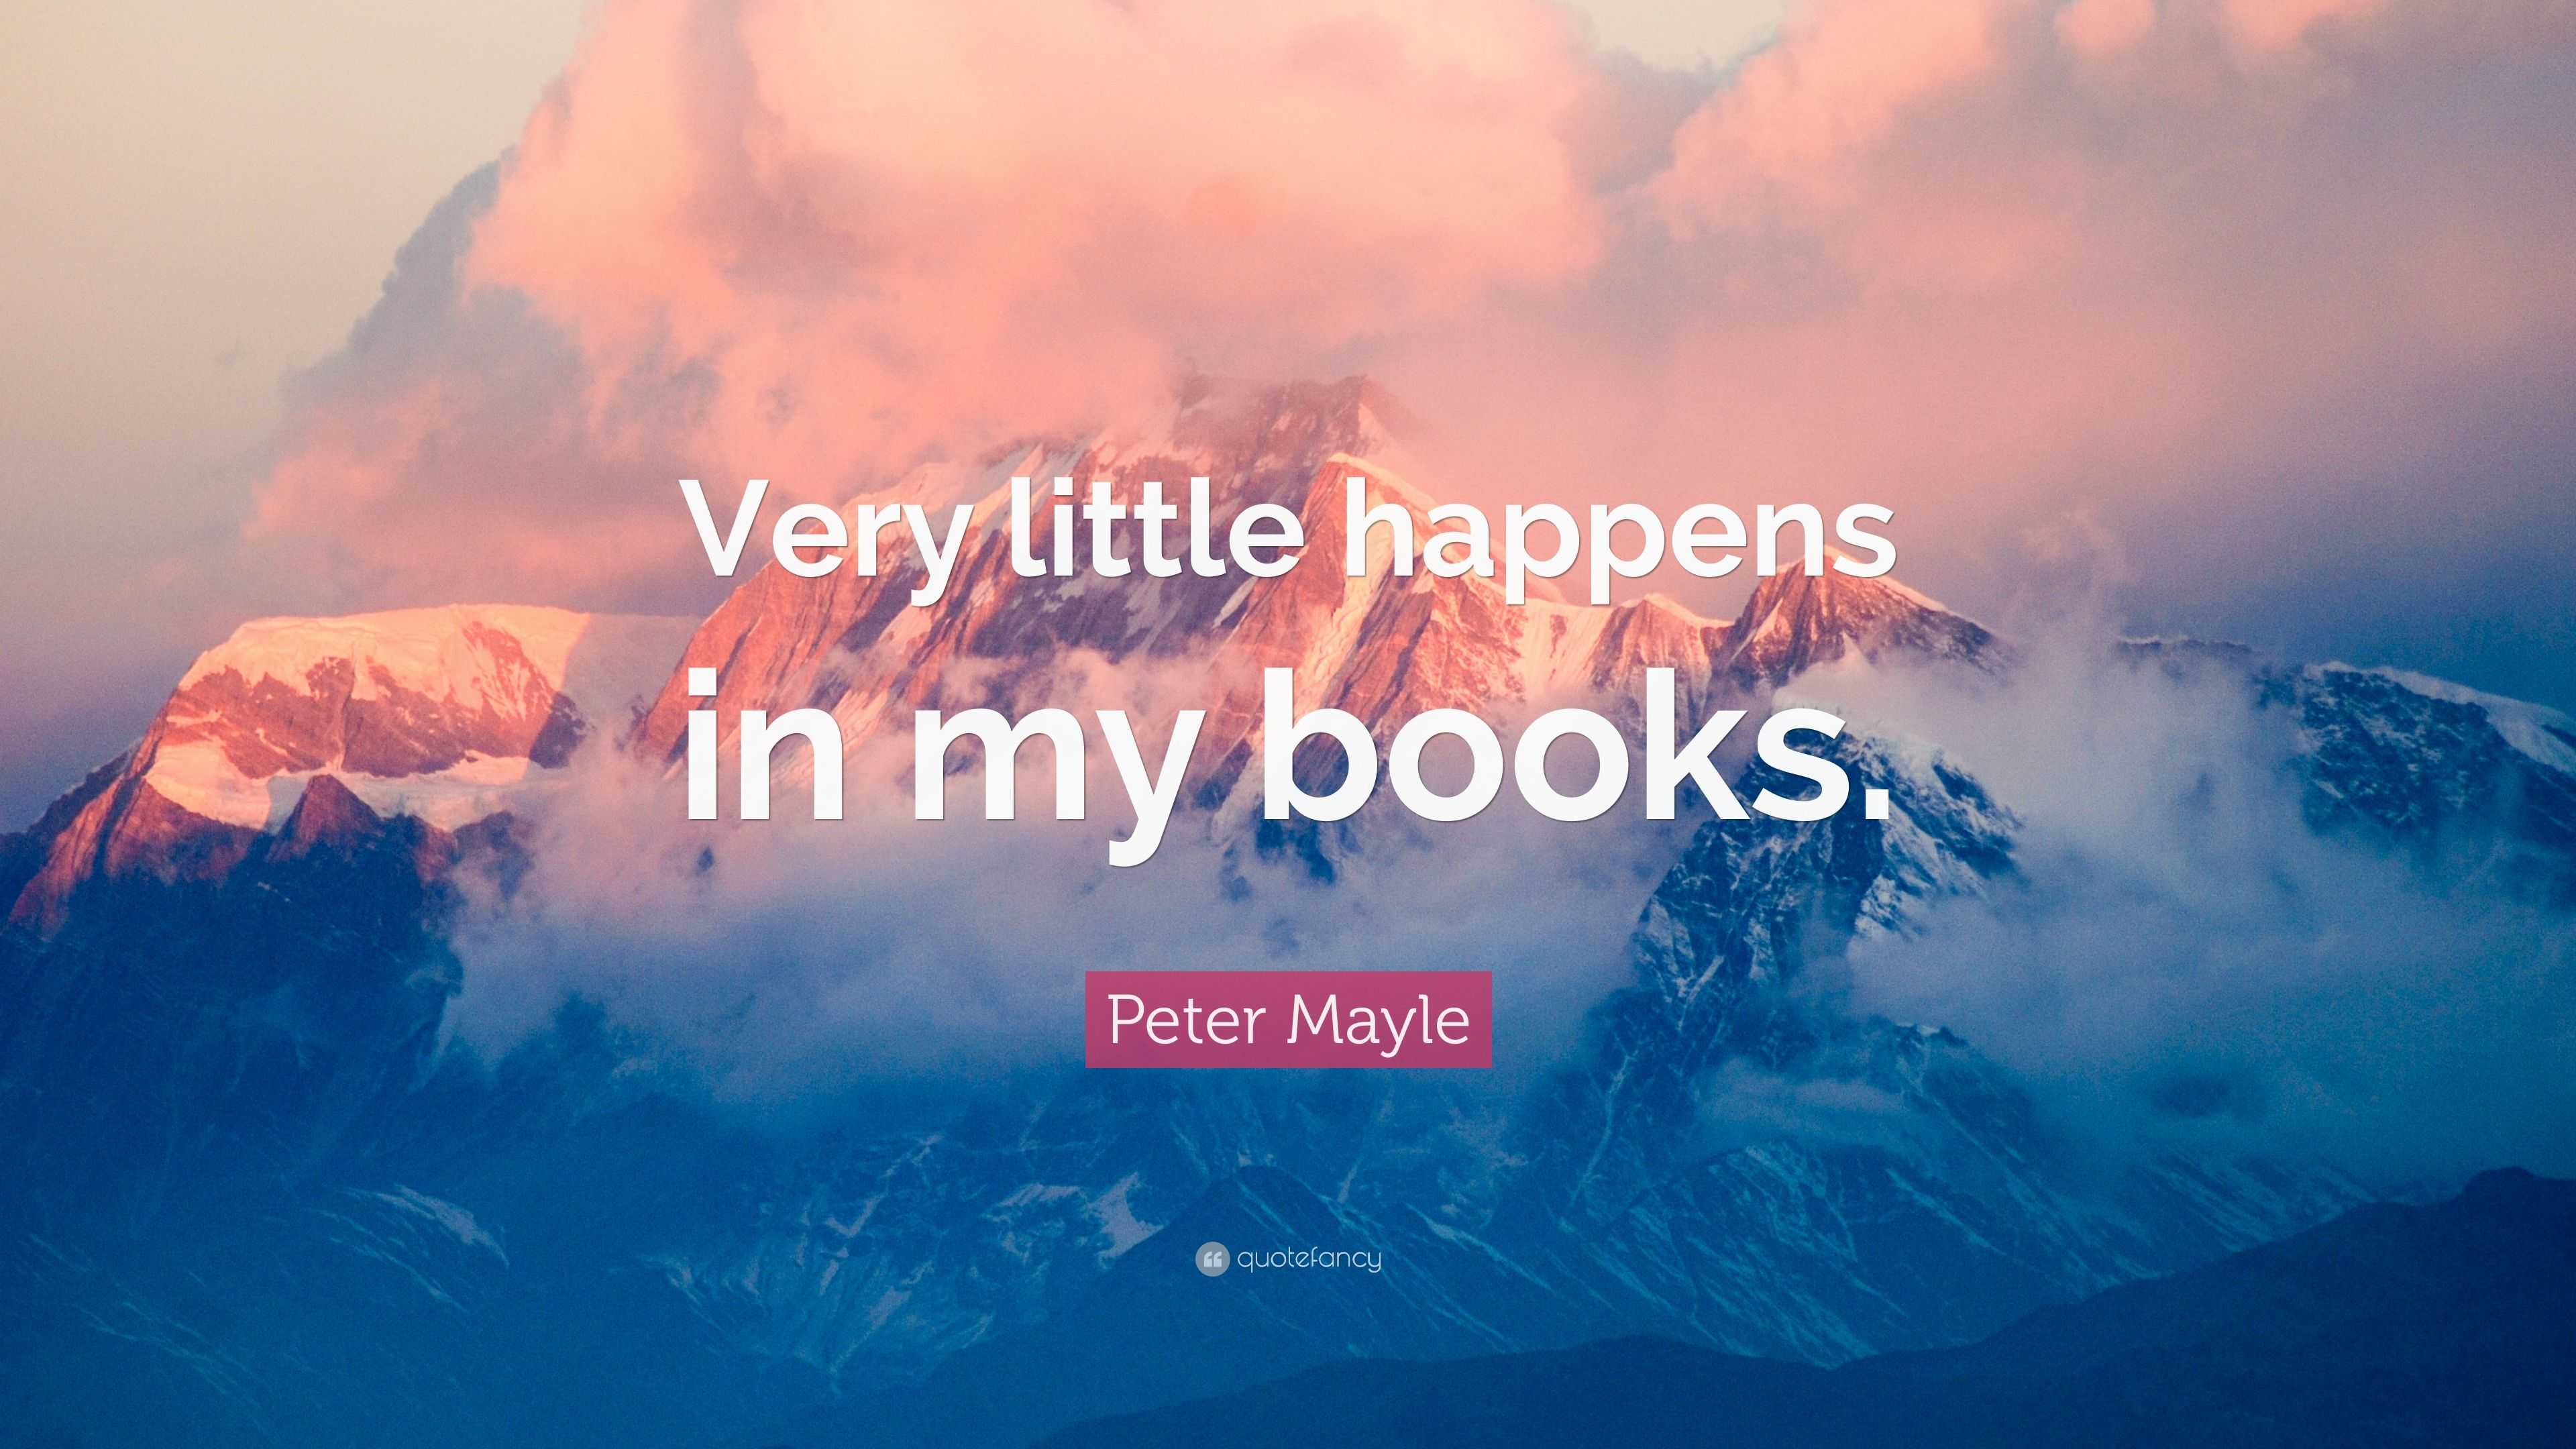 Peter Mayle Quote: “Very little happens in my books.”